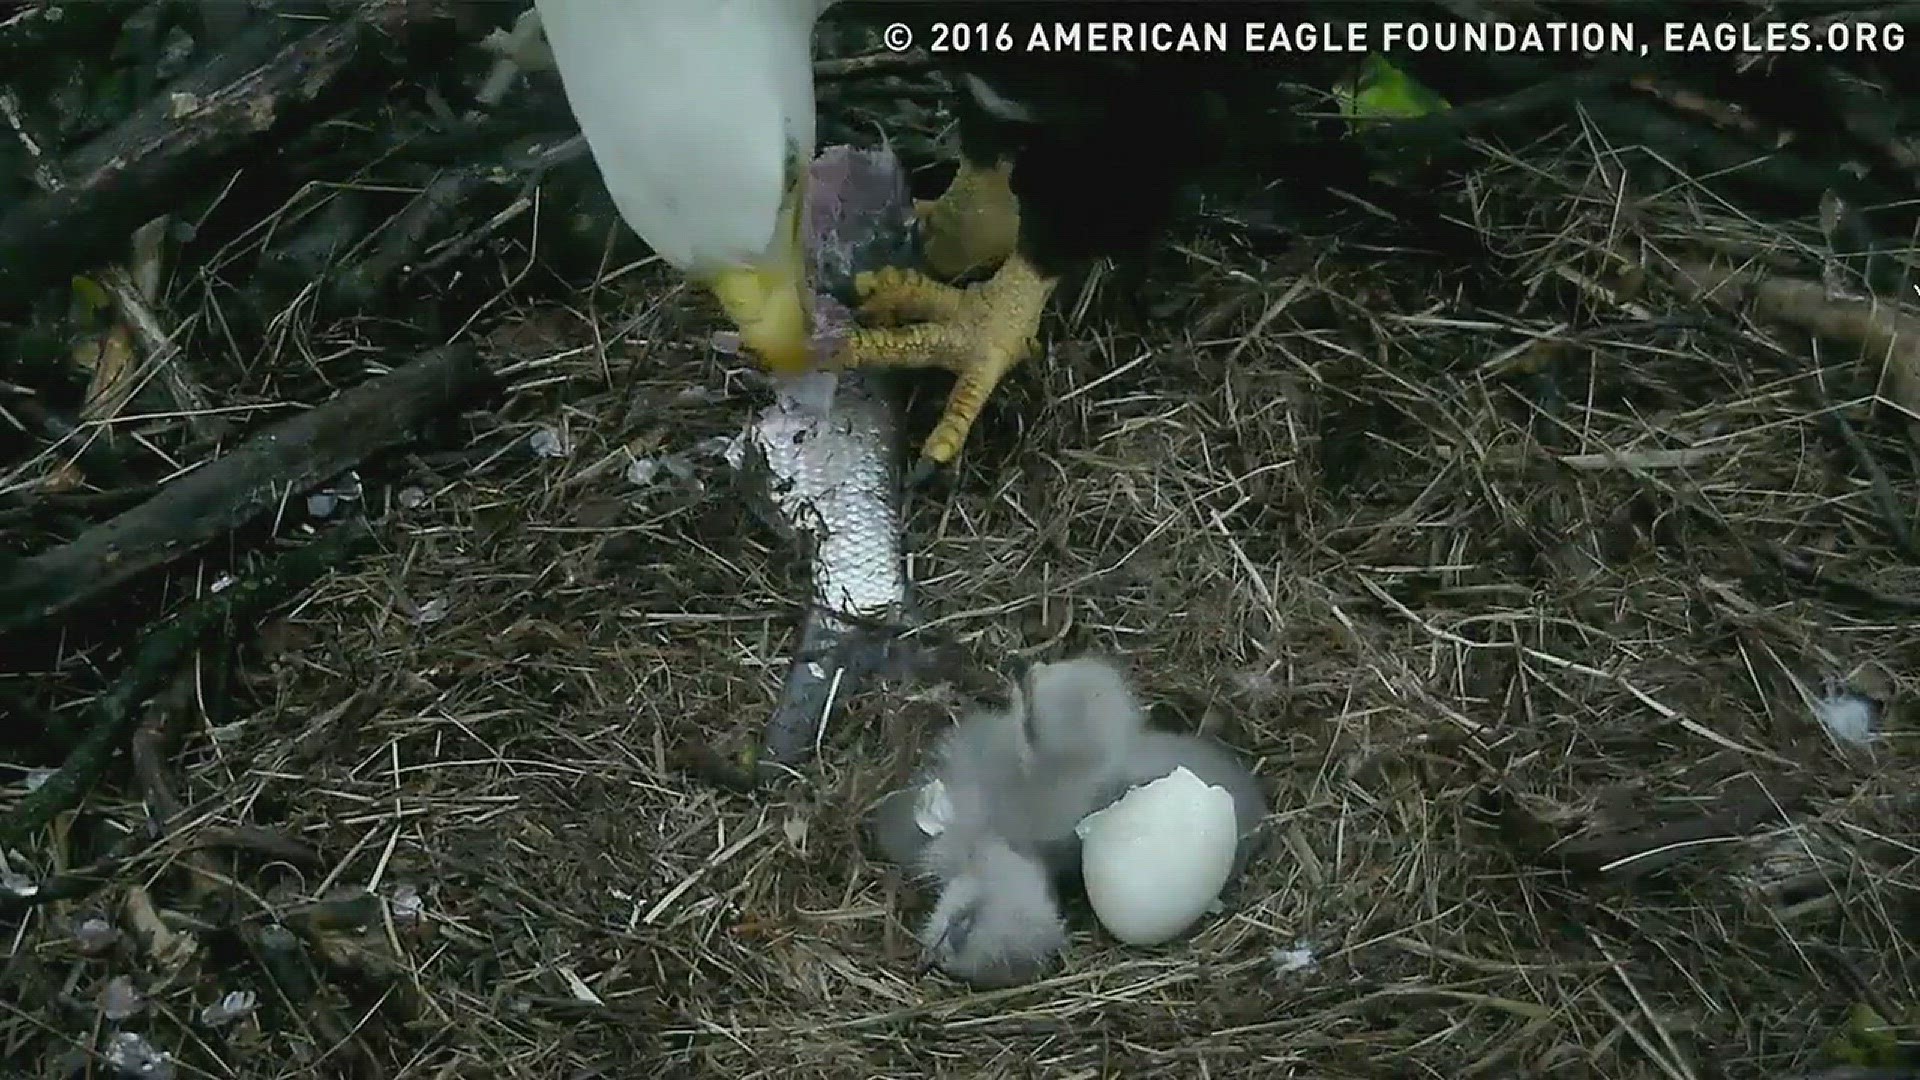 Two bald eagles named "Mr. President" and "The First Lady" at the National Arboretum are now parents of an eaglet hatched on Thursday.